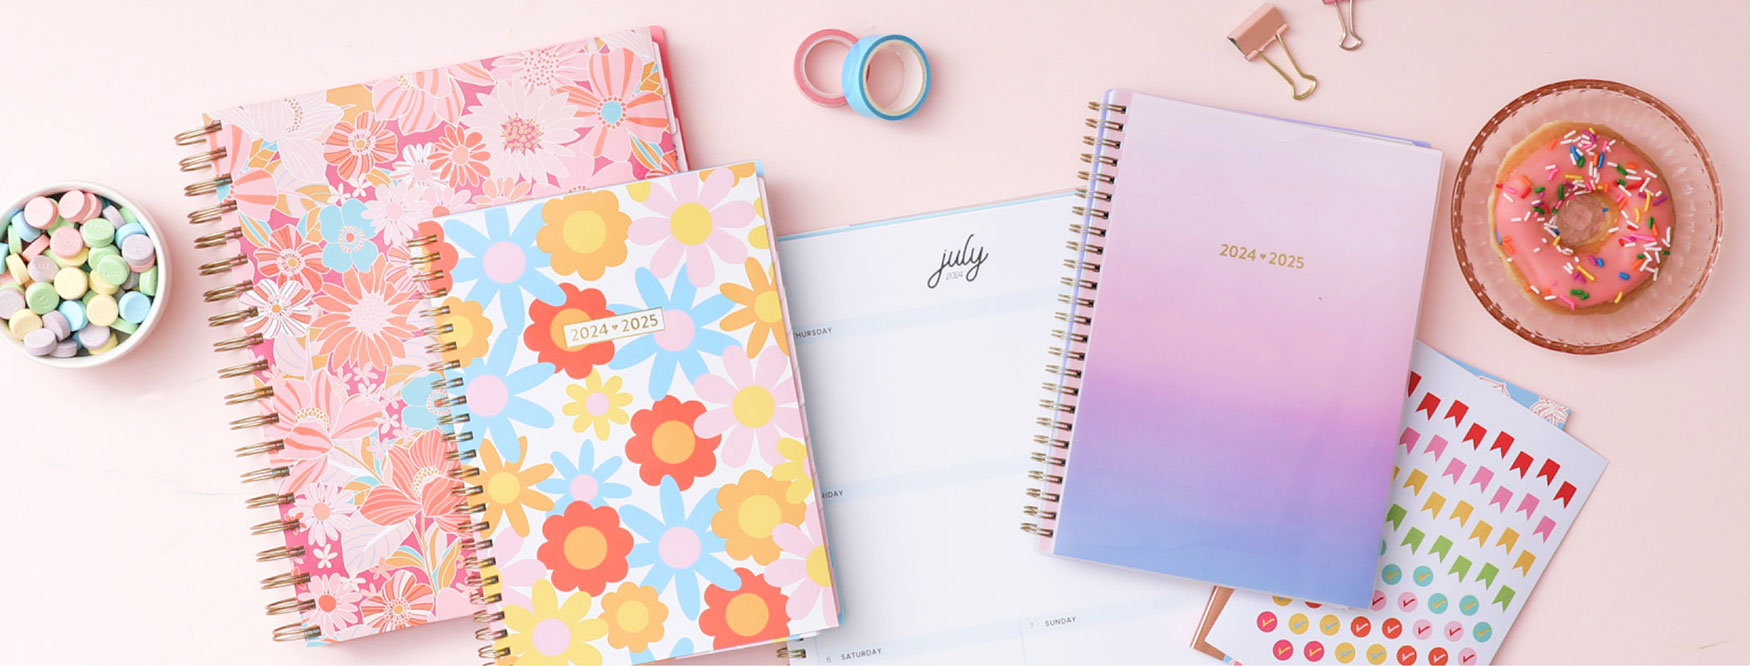 Brighten up your day with various 2024-2025 colorful and vibrant planners, surrounded by a bowl of candies, a plate of donuts and stickers. 